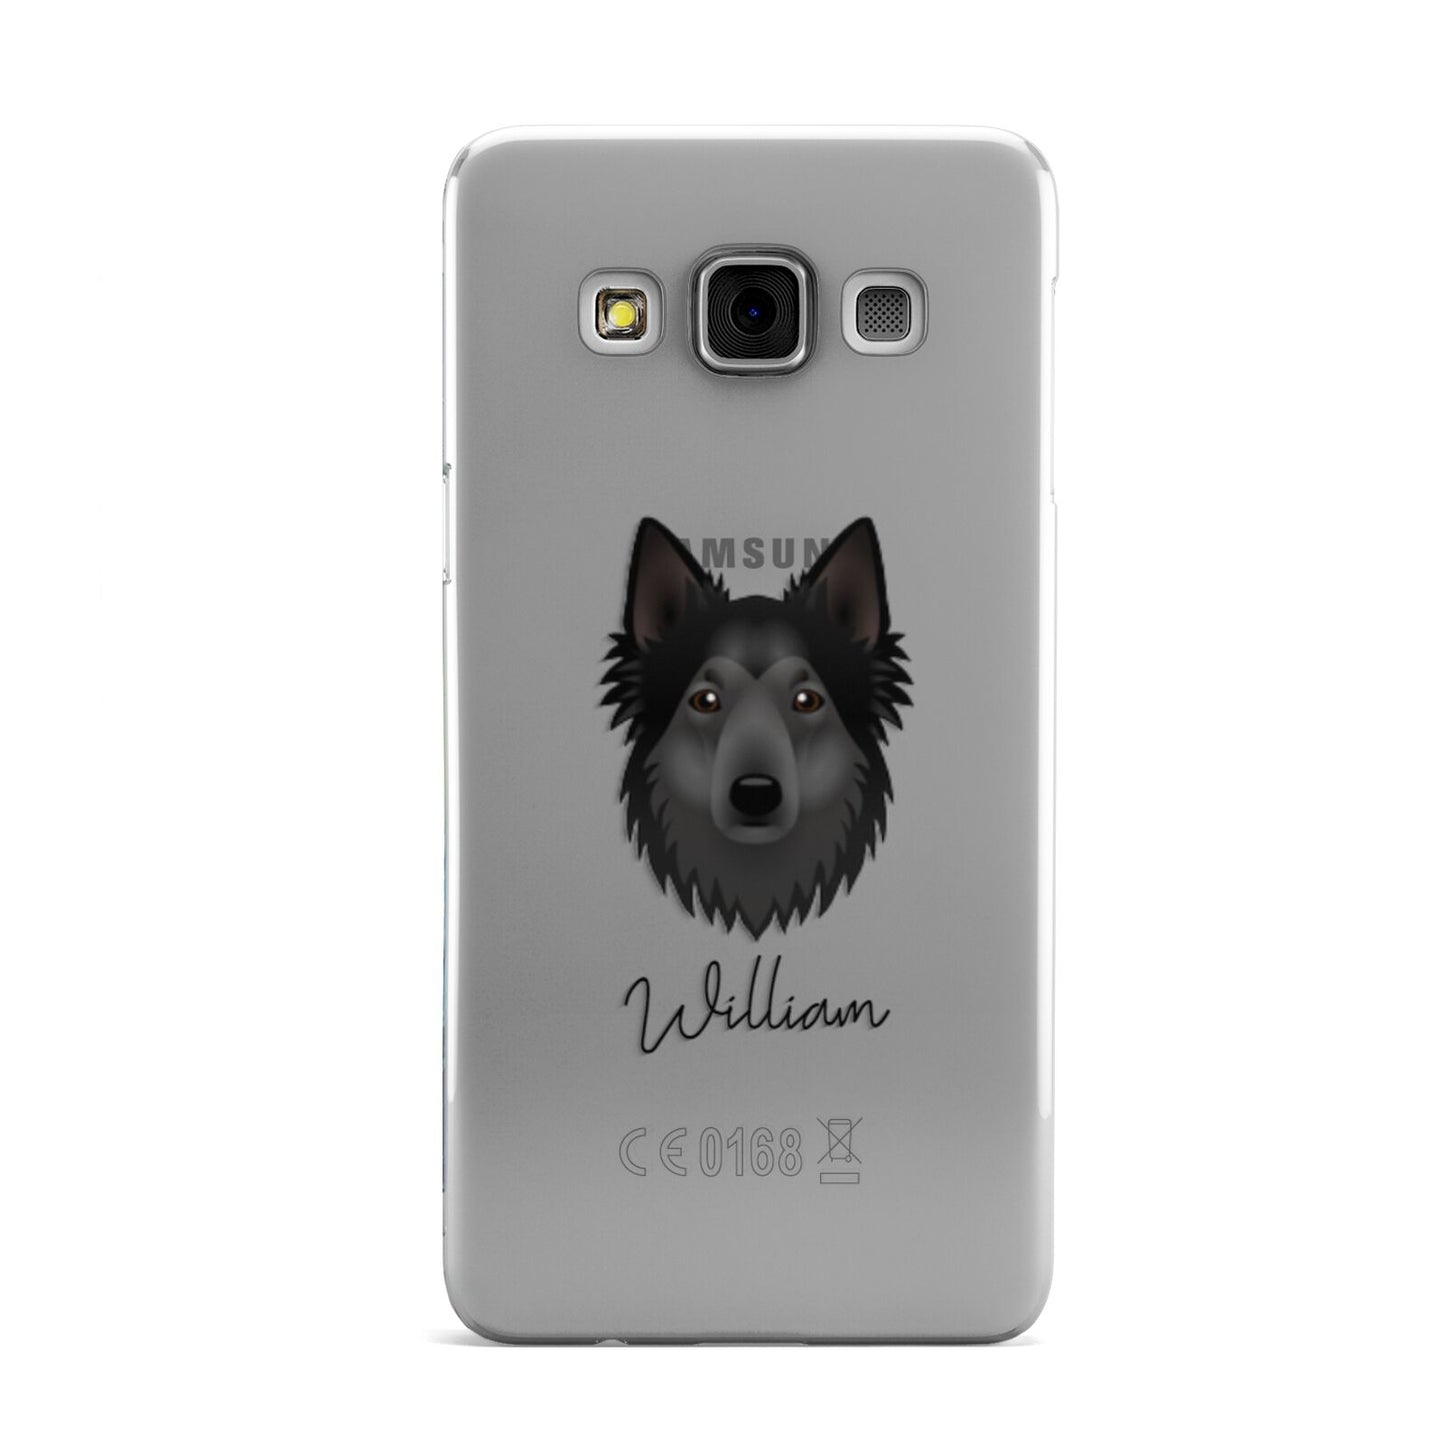 Shollie Personalised Samsung Galaxy A3 Case